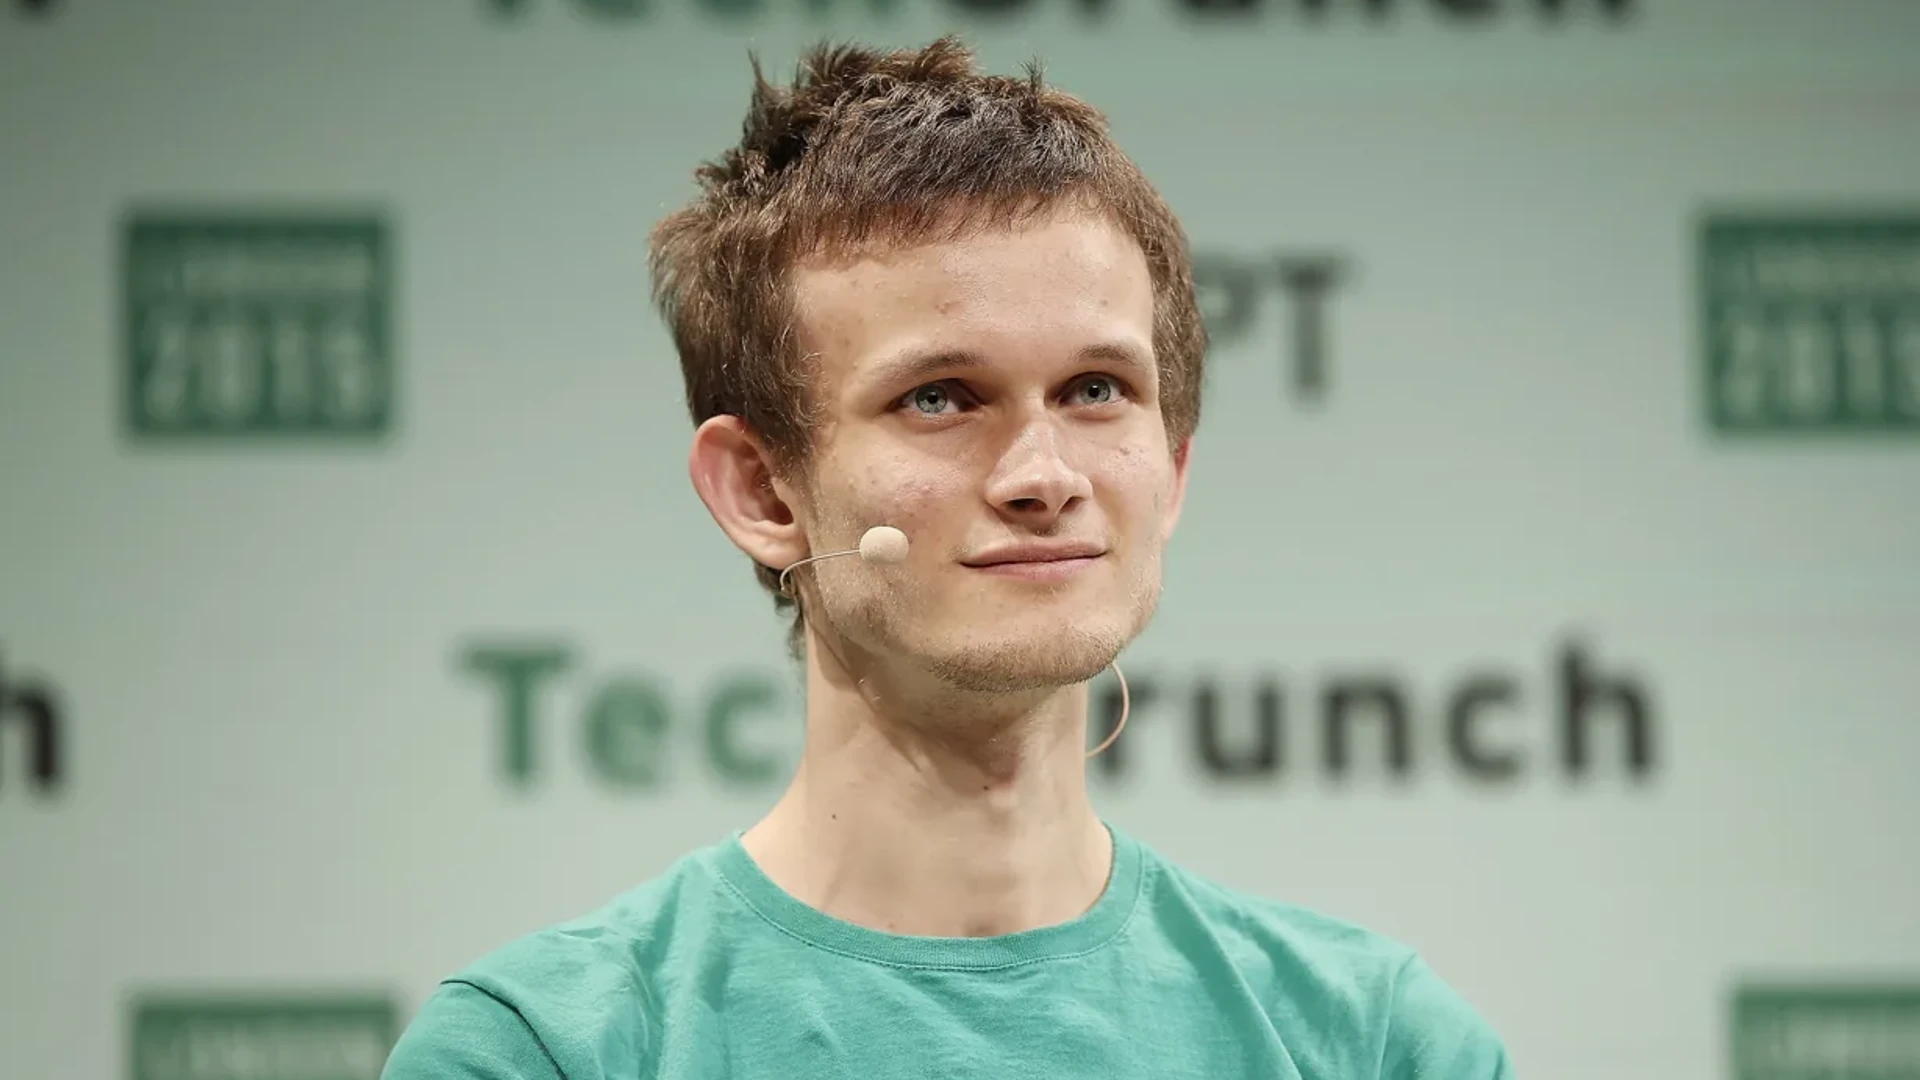 It’s Why Ethereum Co-founder Vitalik Buterin Is Taking Back His Rs. 747 Crore Crypto Donation From India